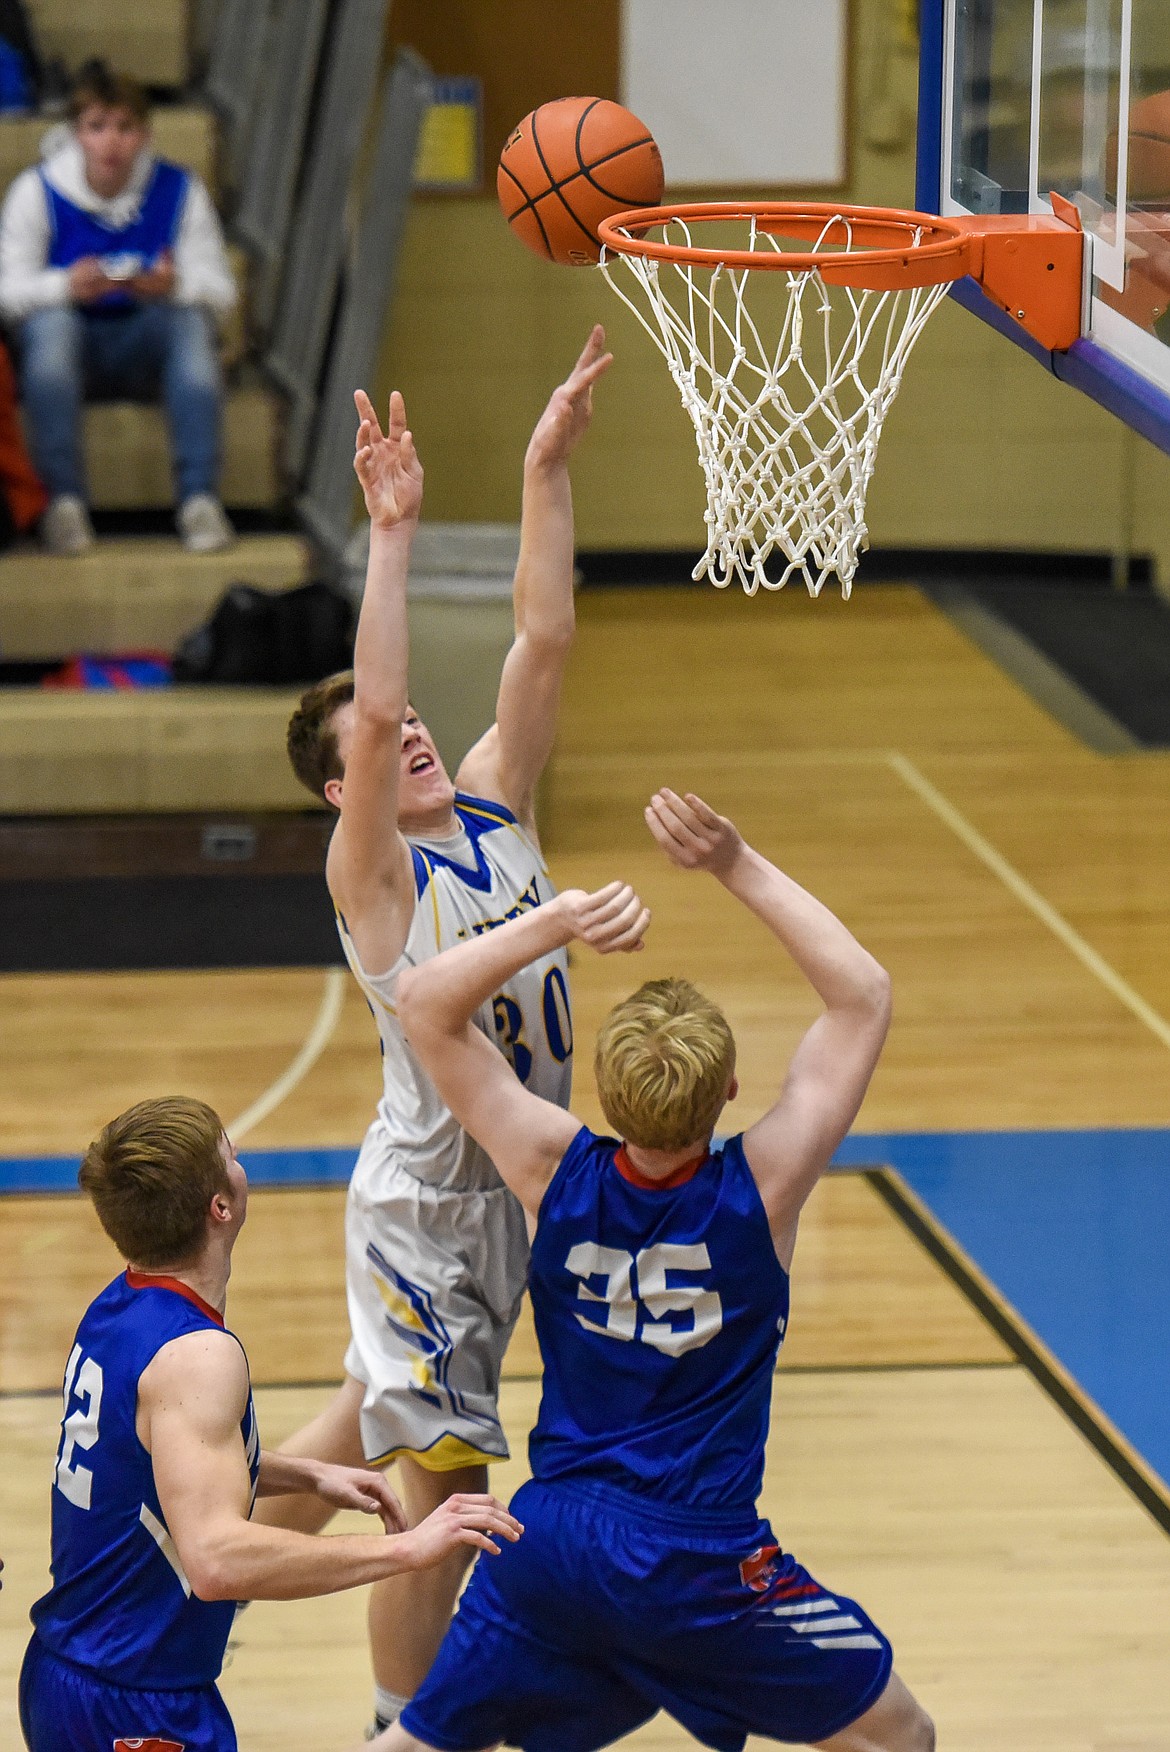 Libby freshman Caden Williams makes a layup early in the second quarter Friday against Columbia Falls. (Ben Kibbey/The Western News)